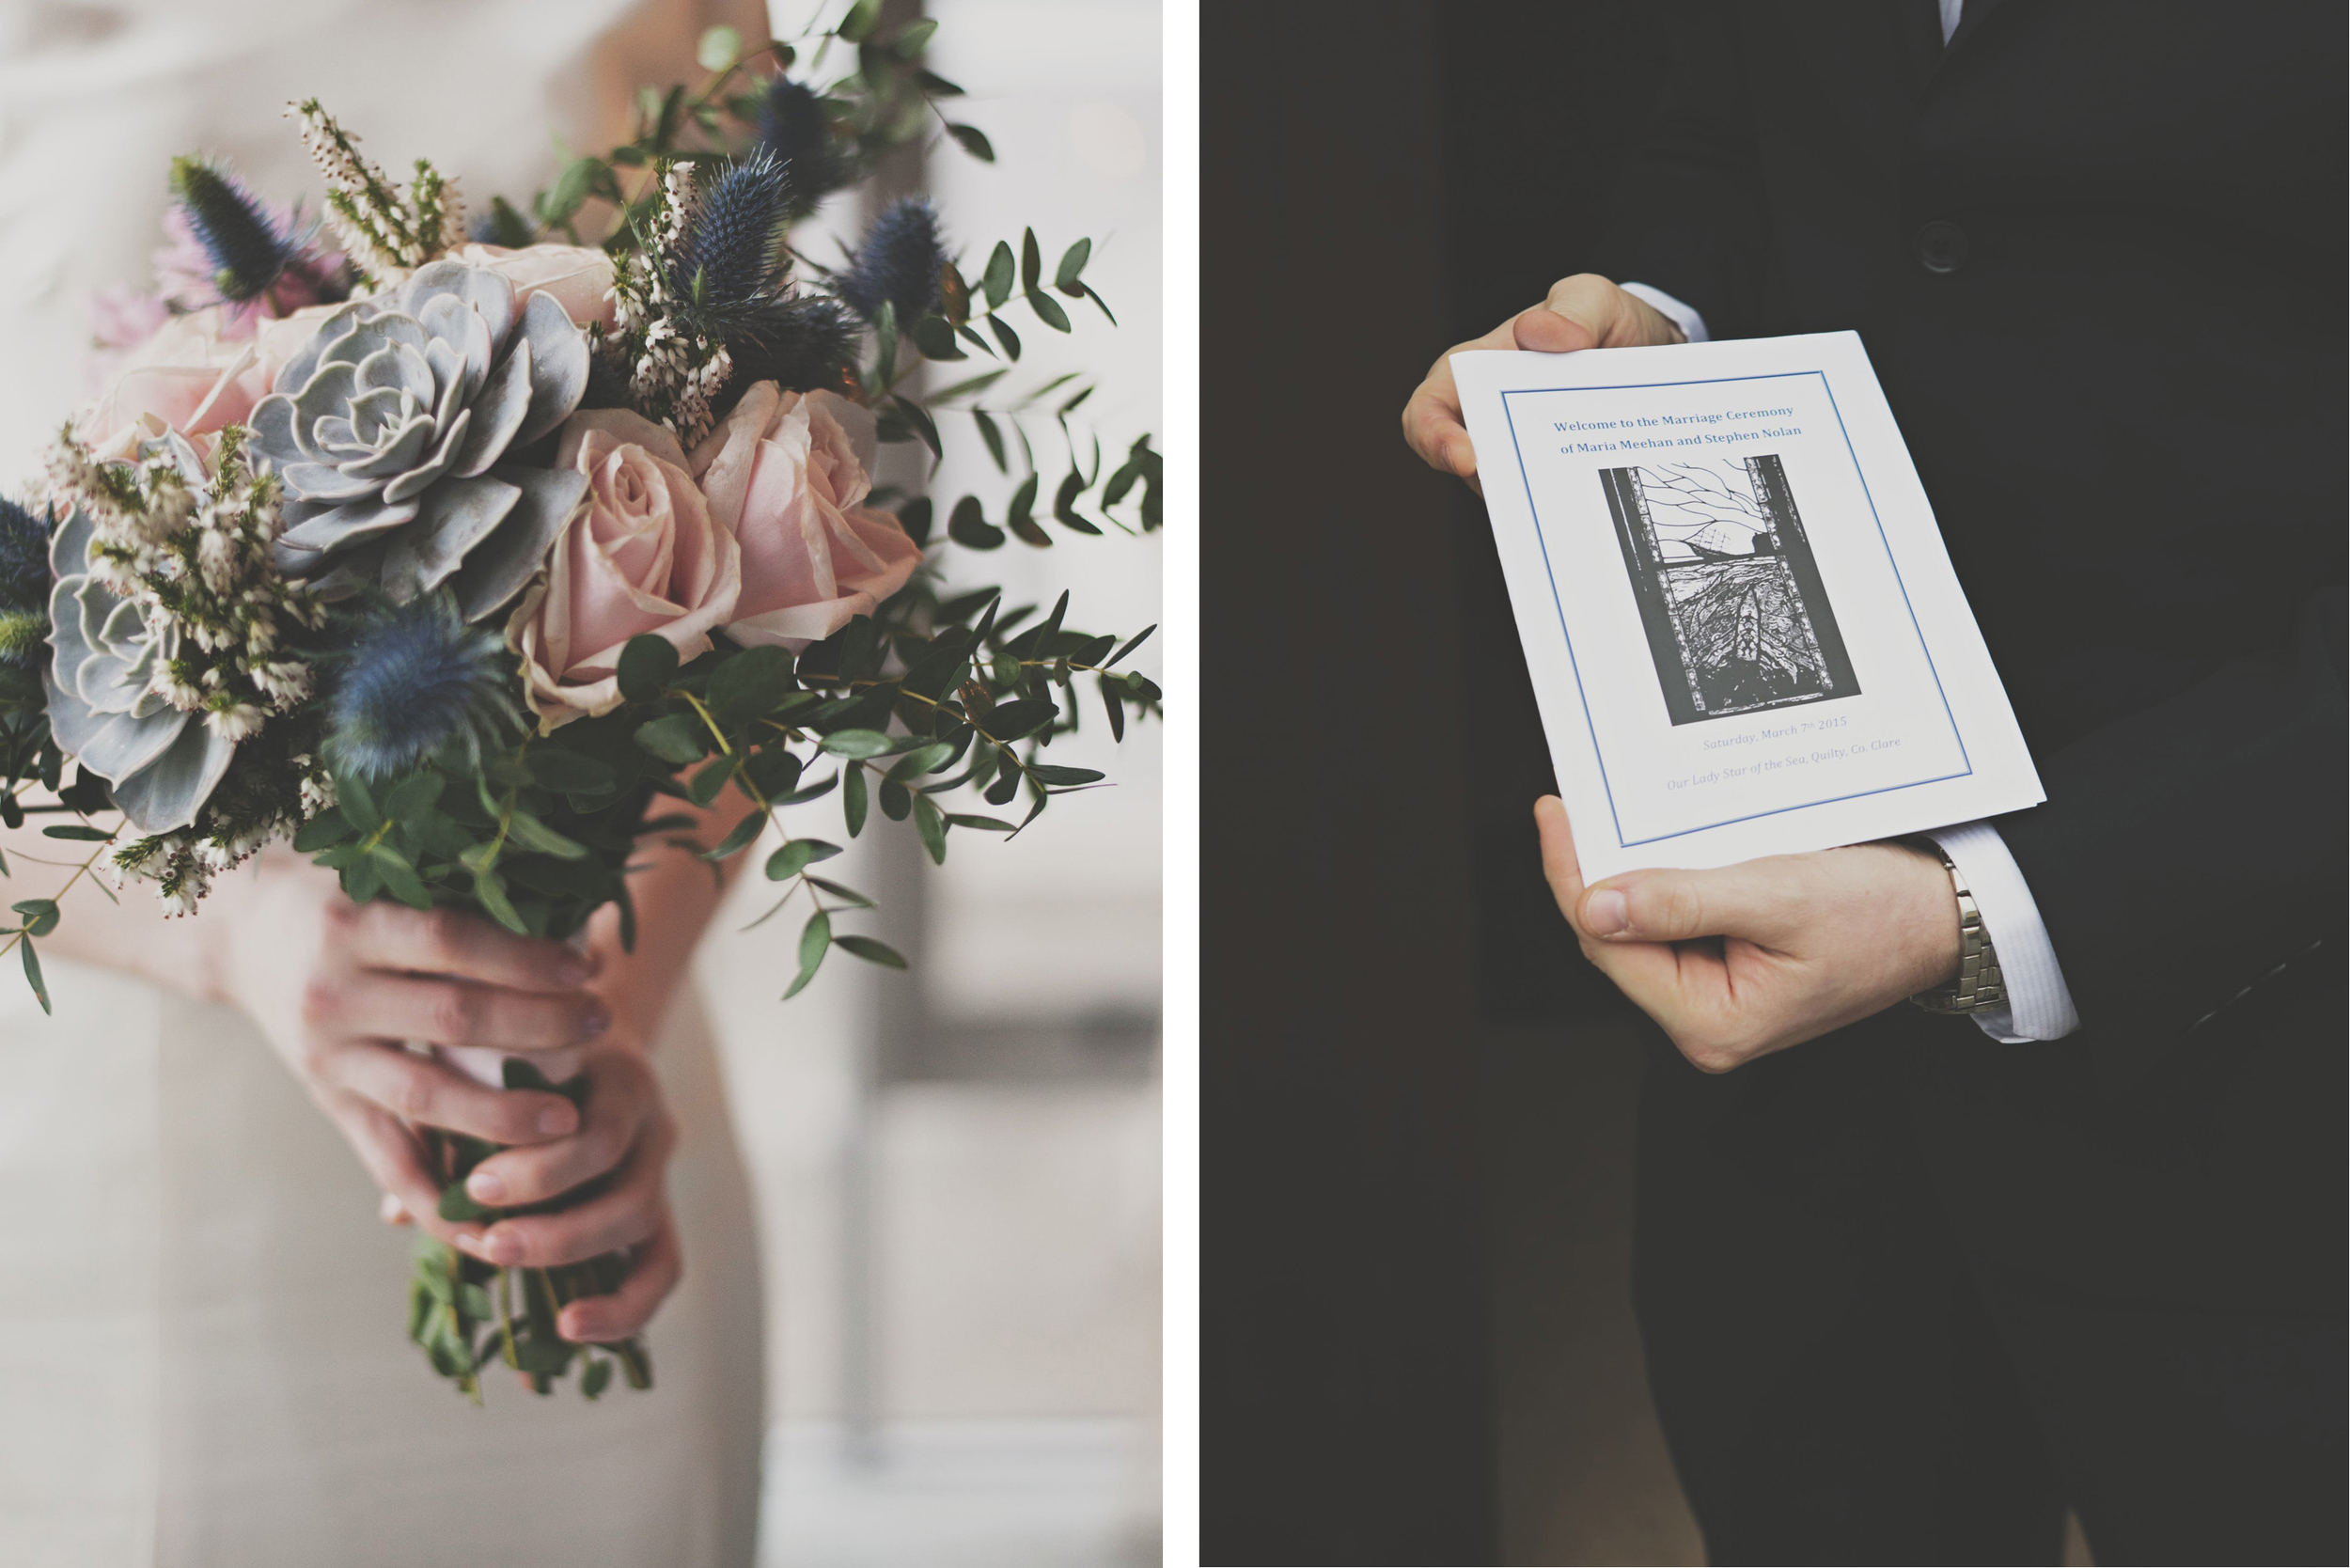 Wedding booklet and bouquet